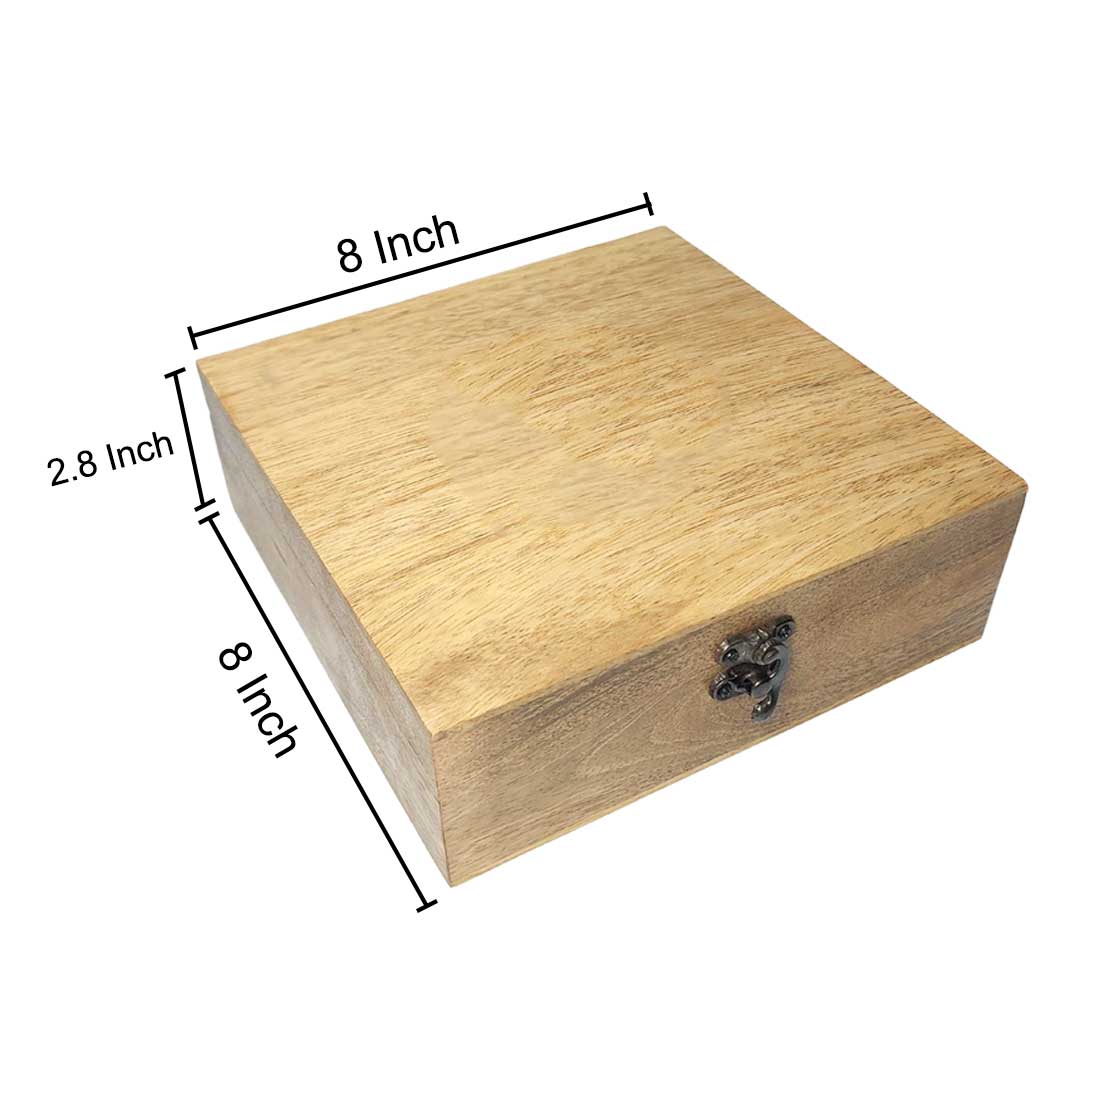 Personalized Wooden Jewelry Box With Engraving
